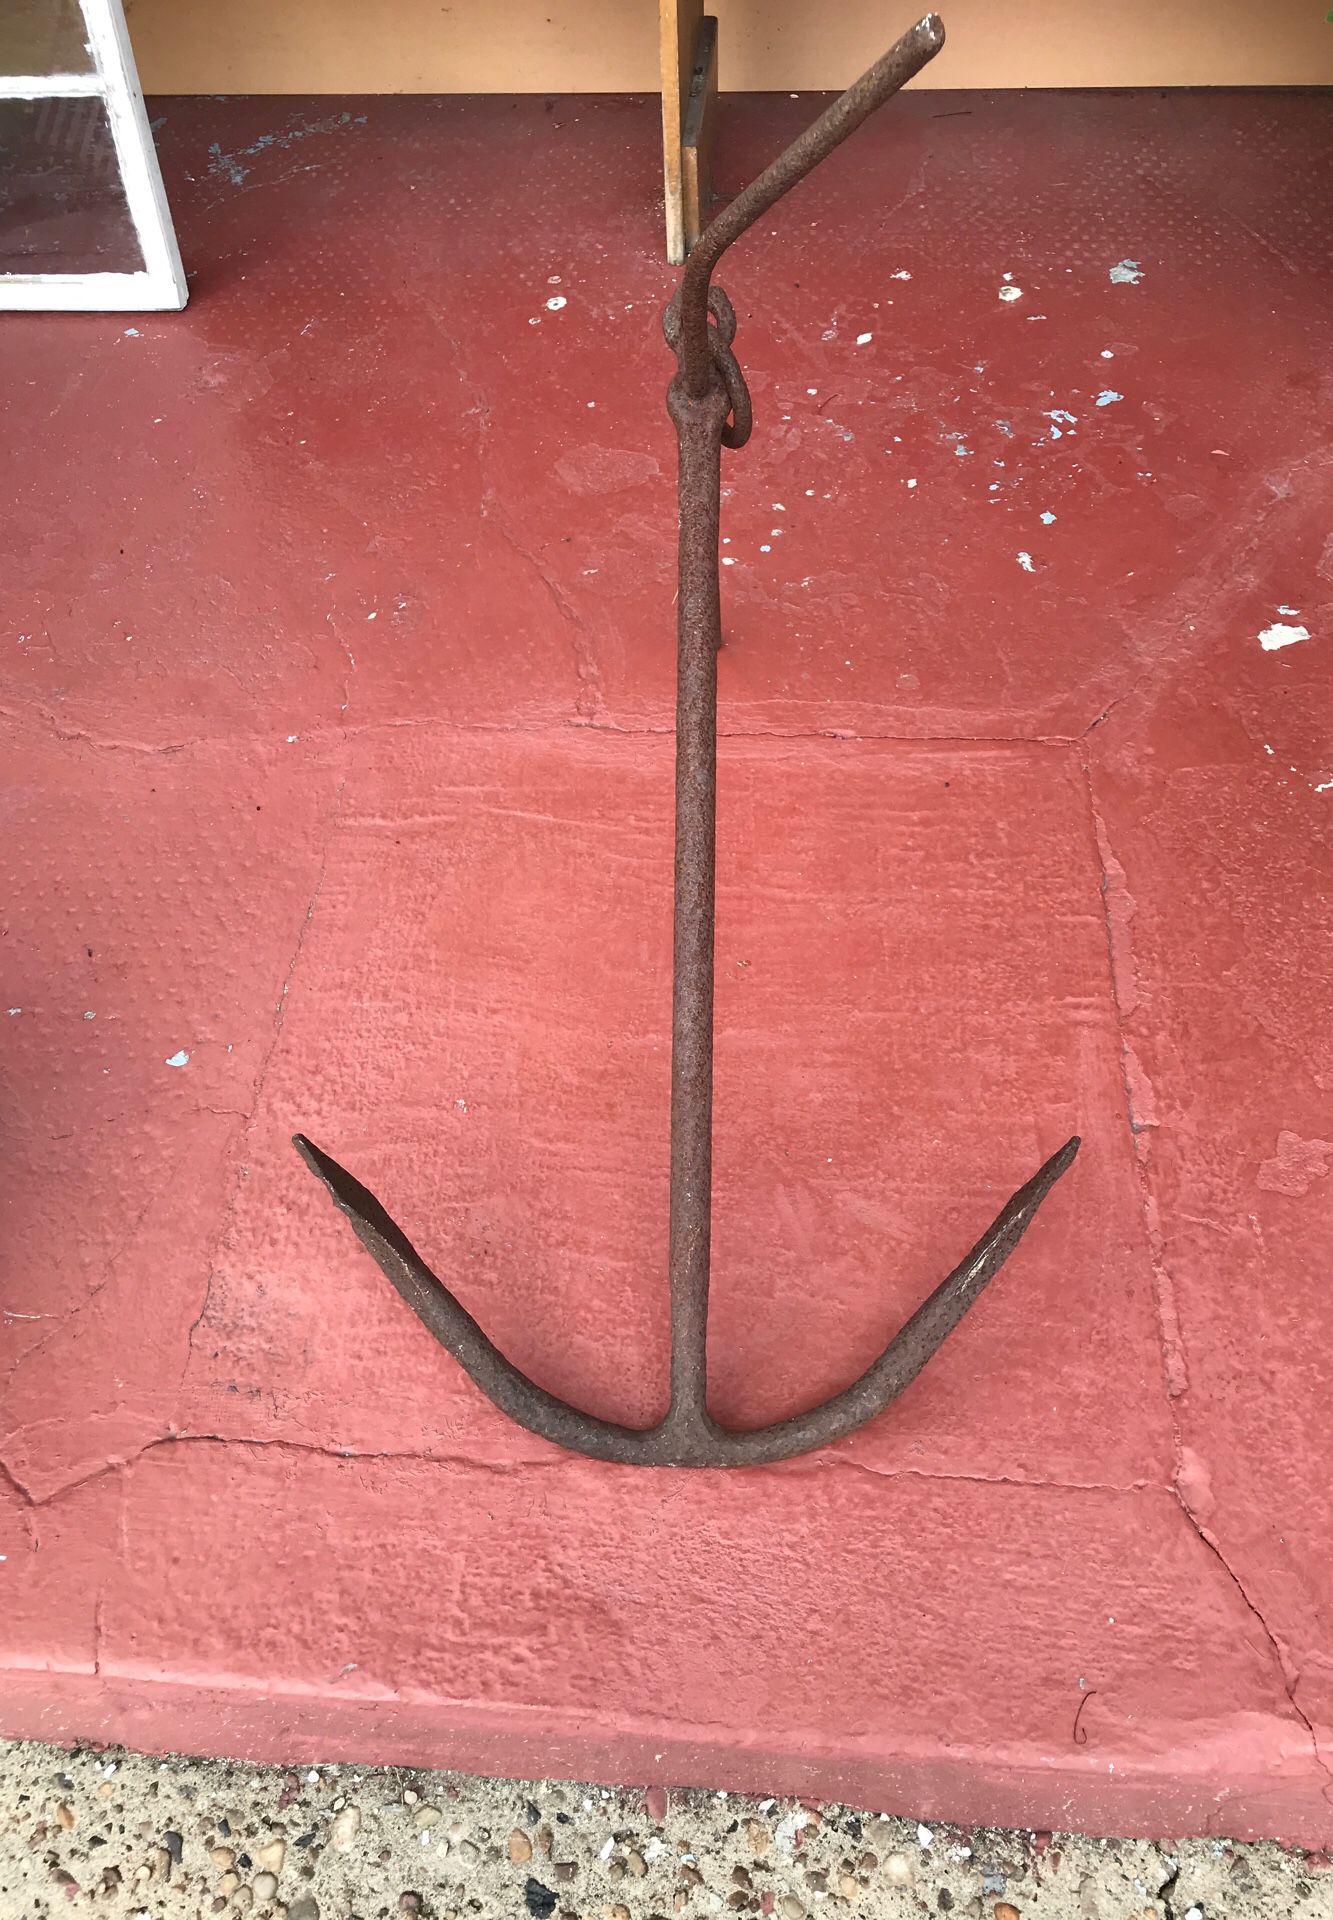 Classic early century anchor